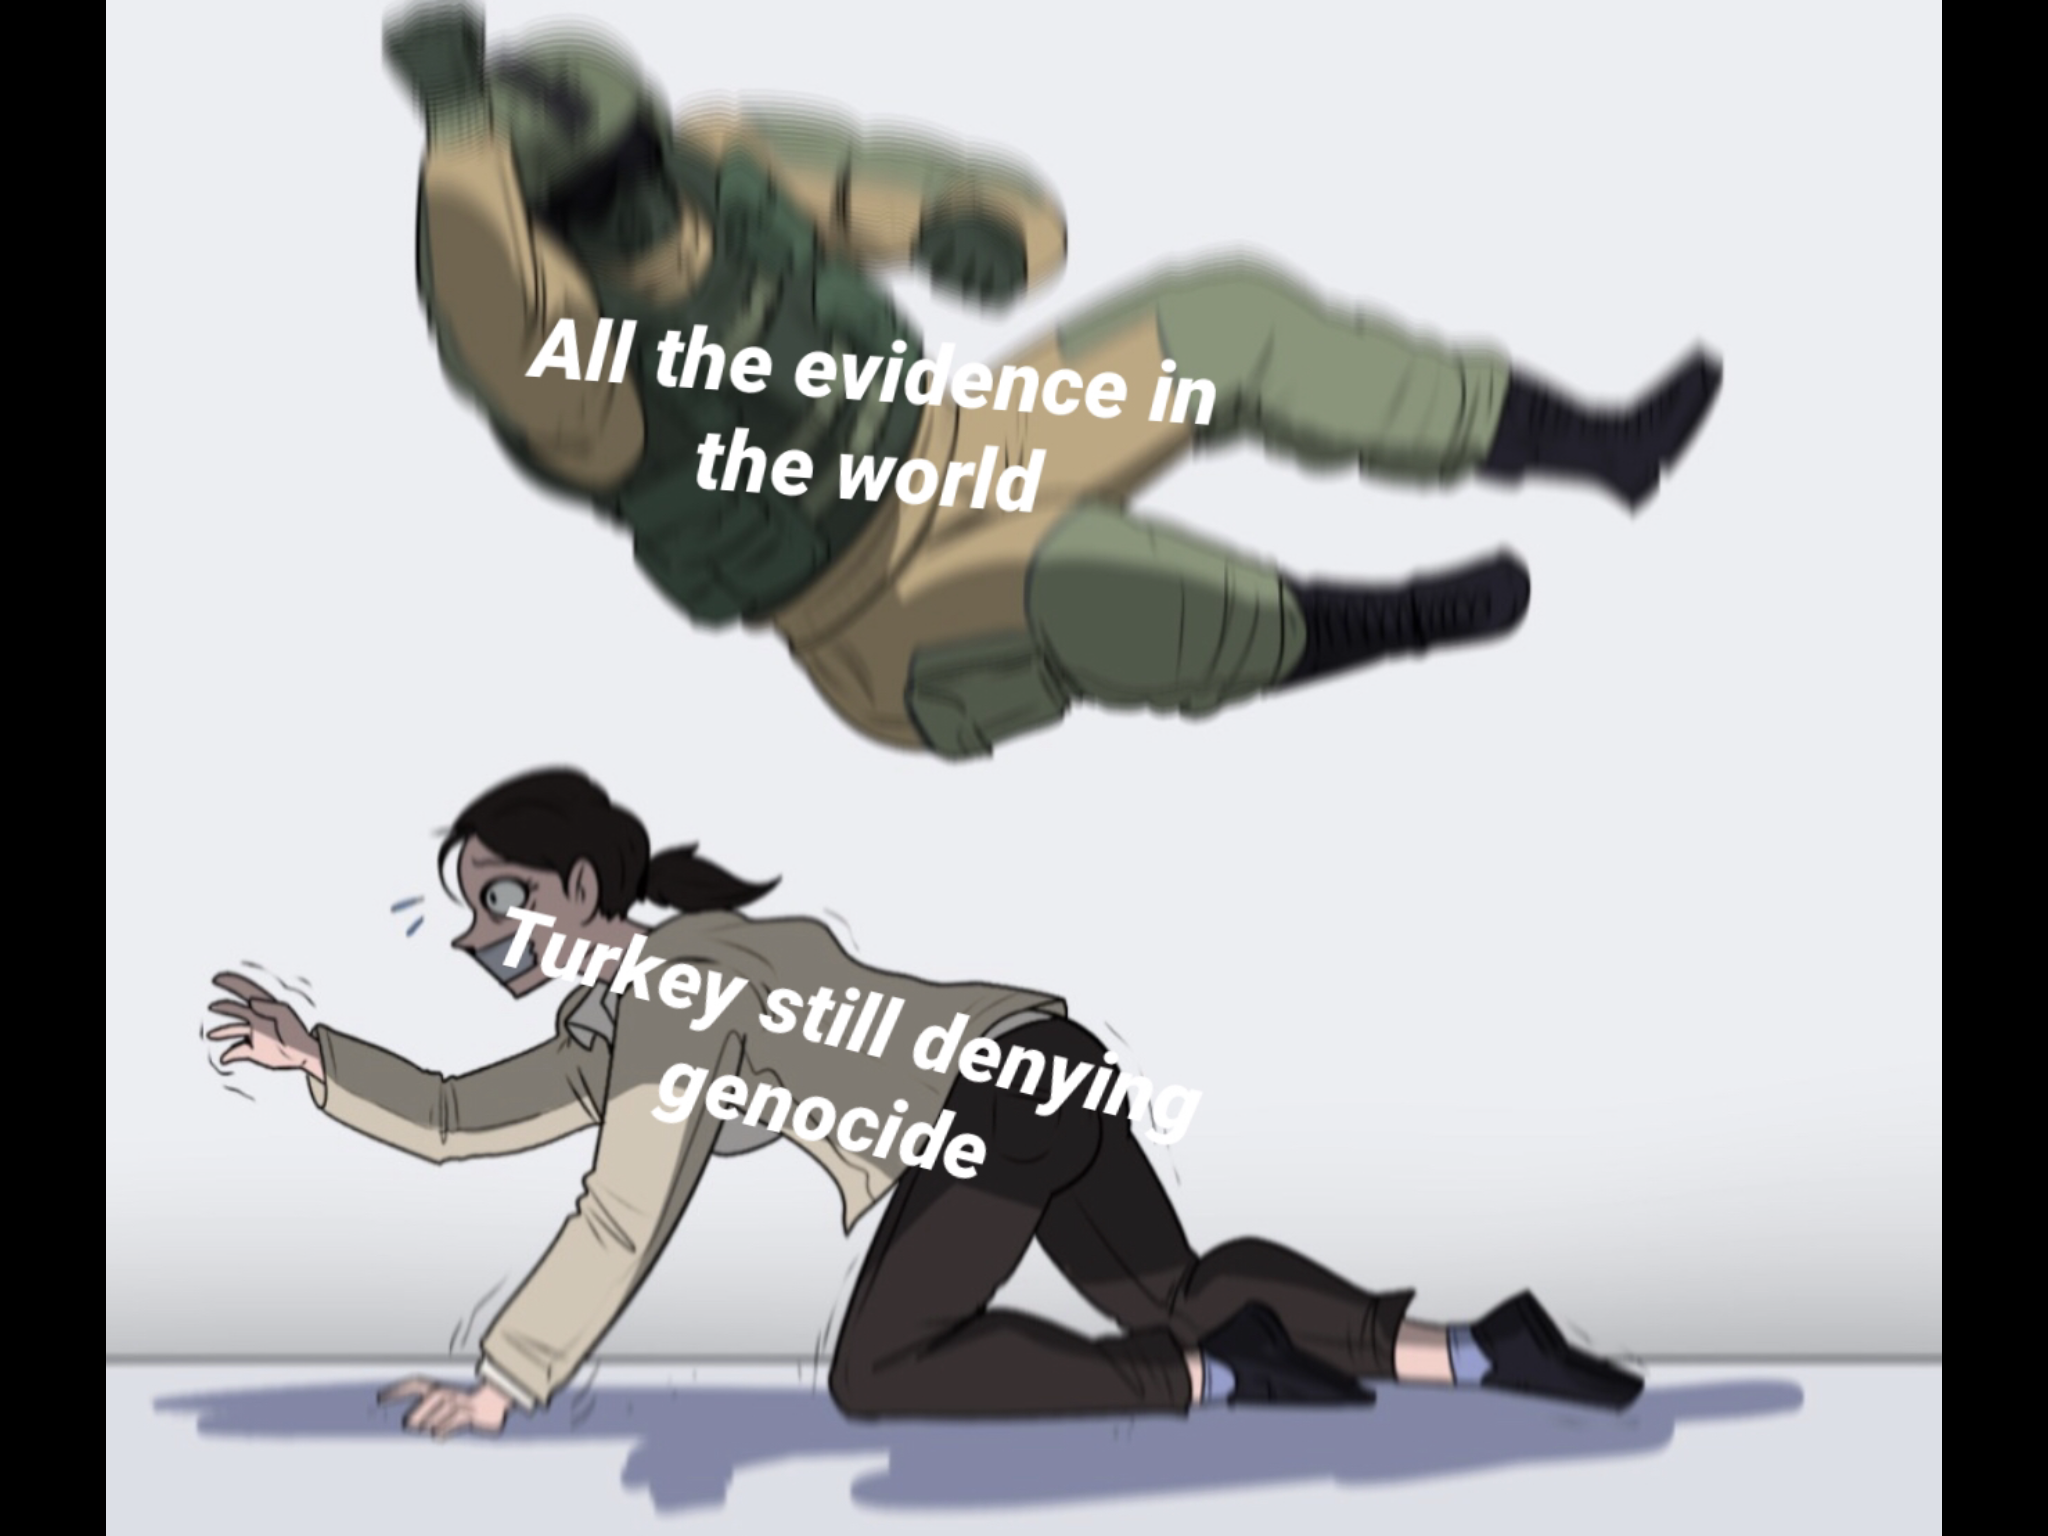 Stop denying when the evidence says otherwise